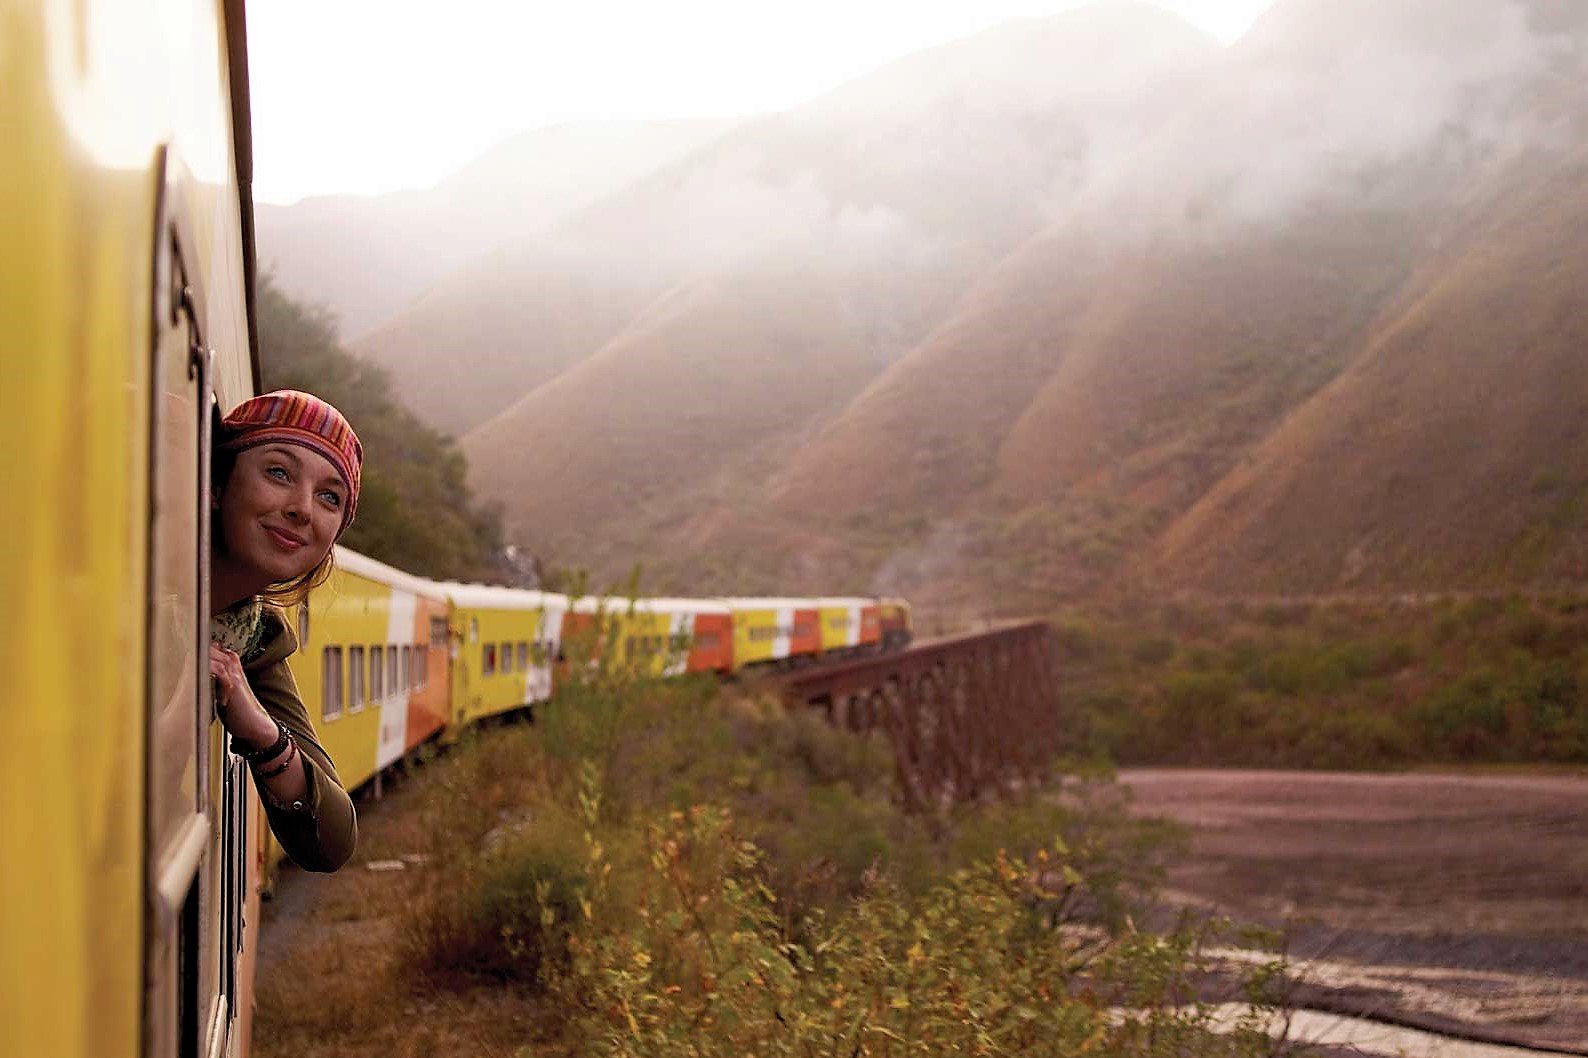 How to take a train to clouds (Tren a las nubes) in Salta